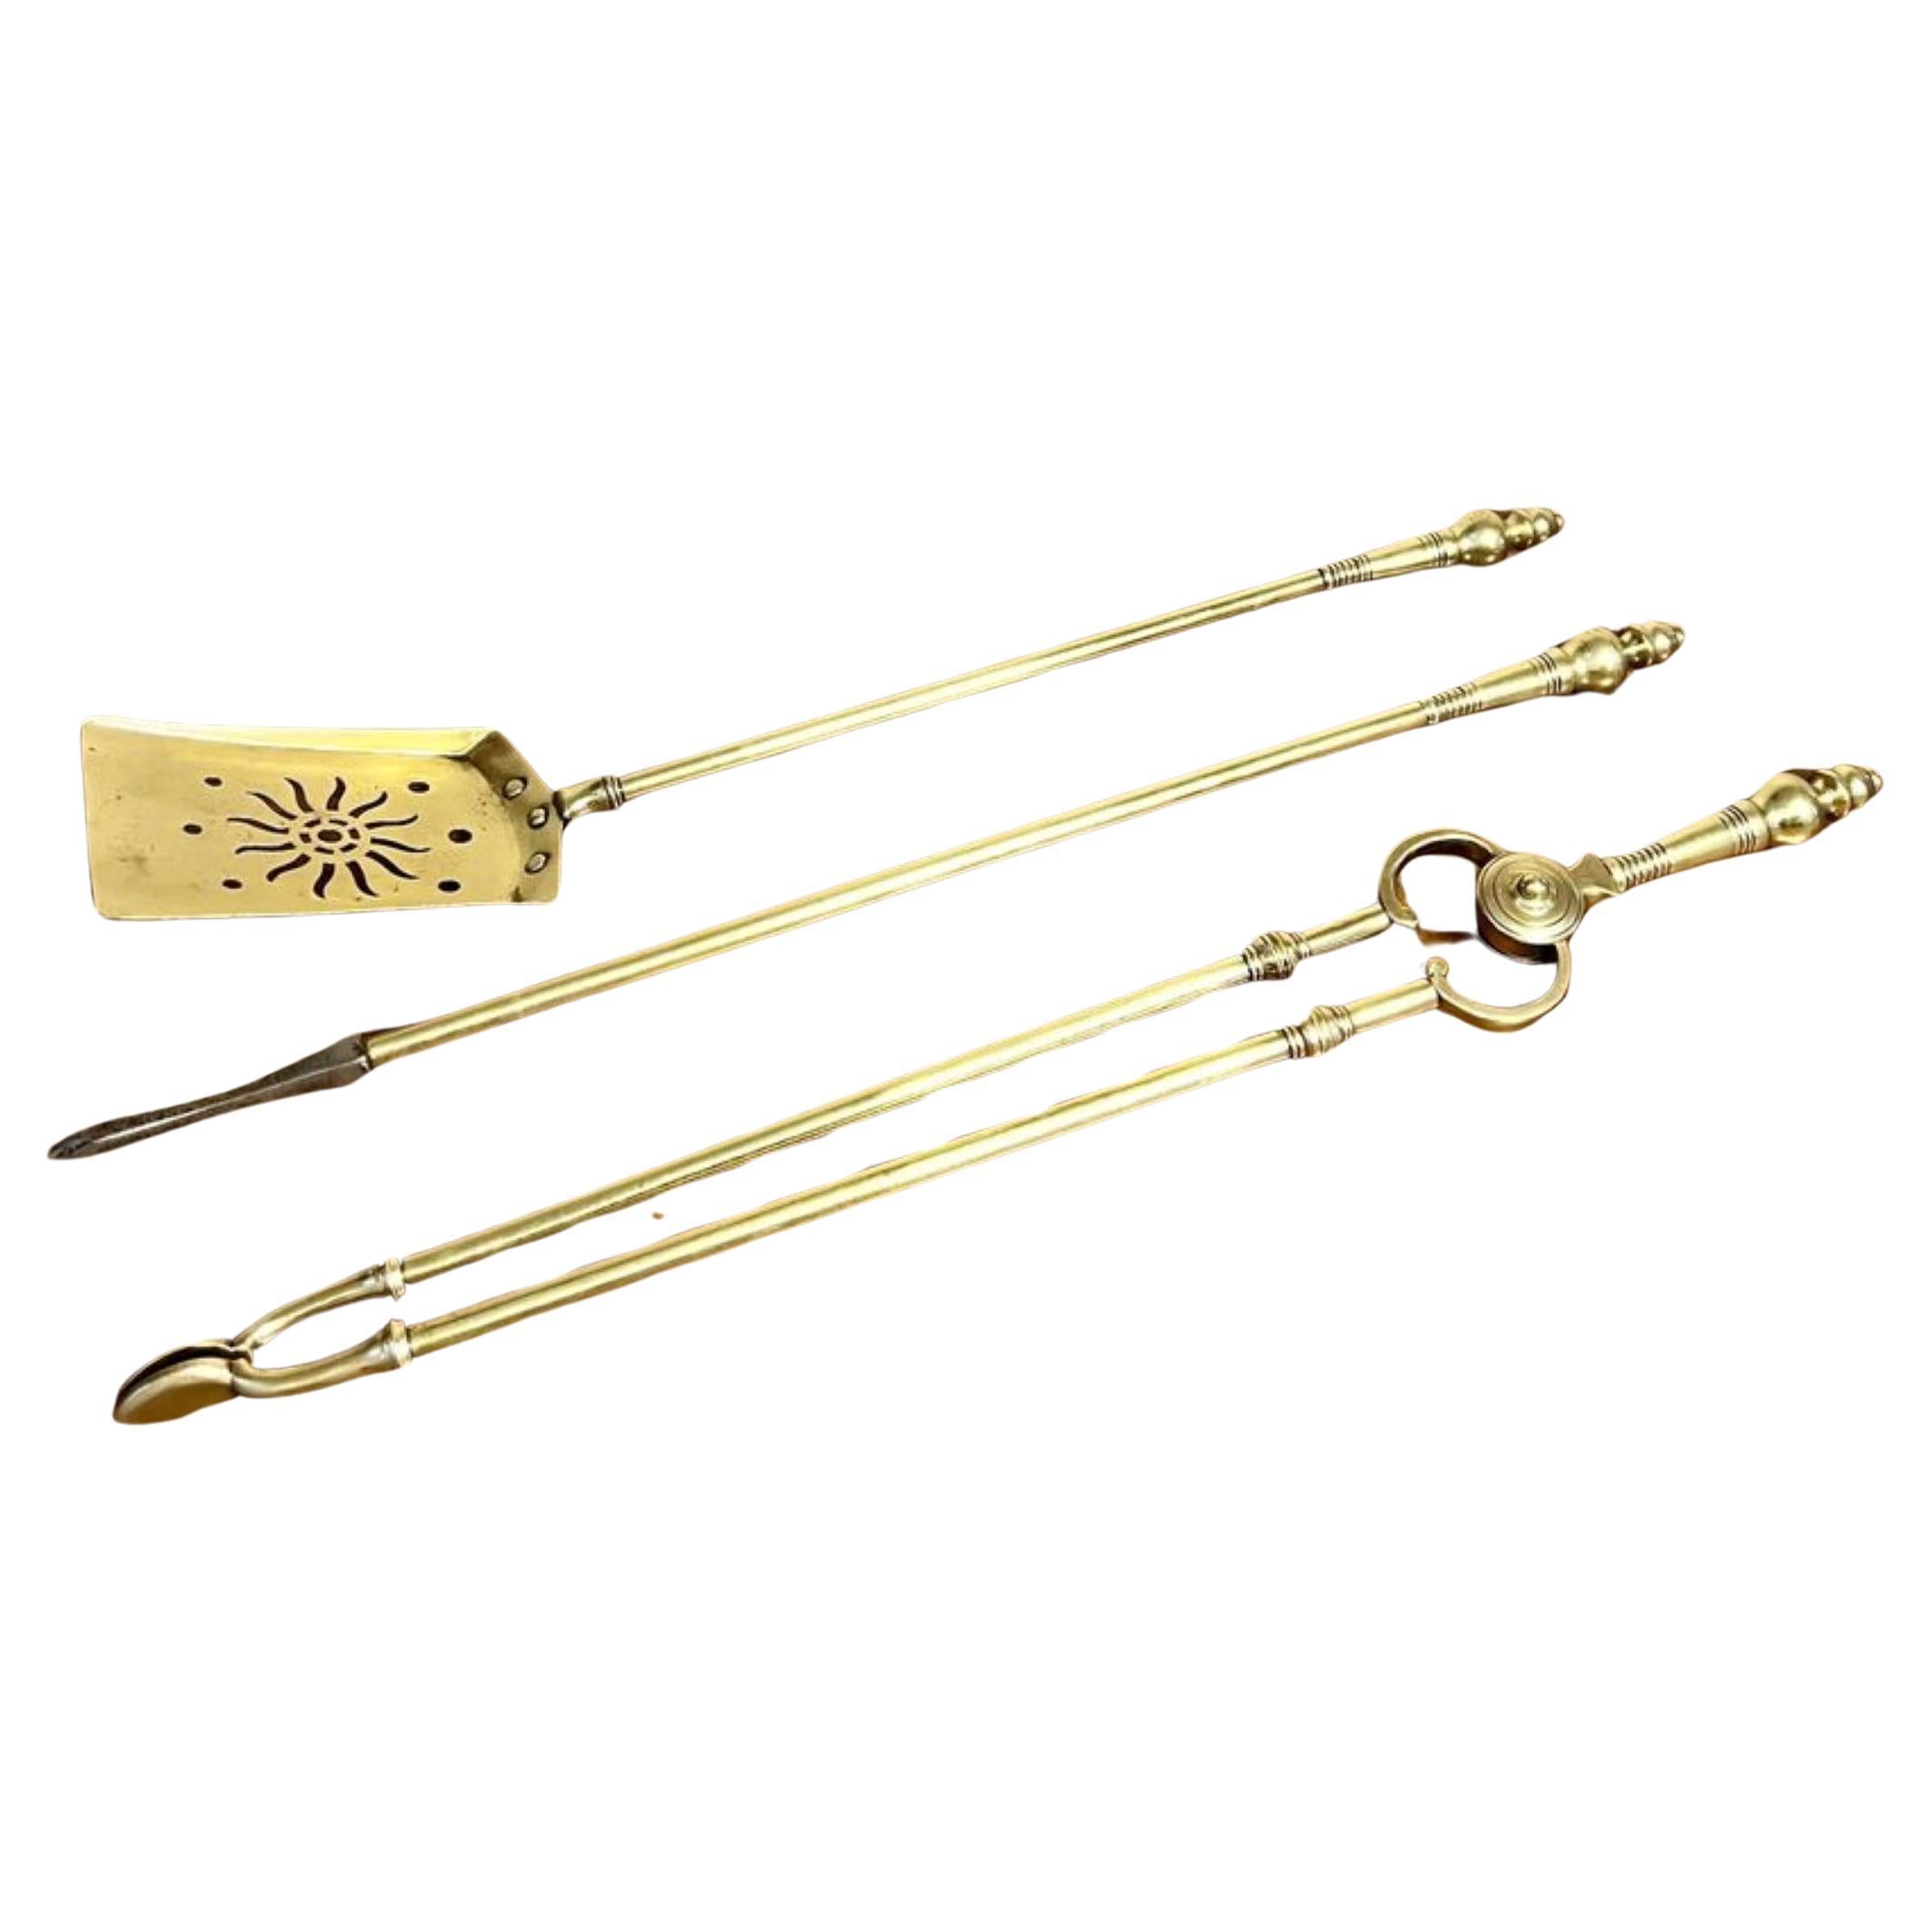 Quality antique Edwardian brass fire irons  For Sale